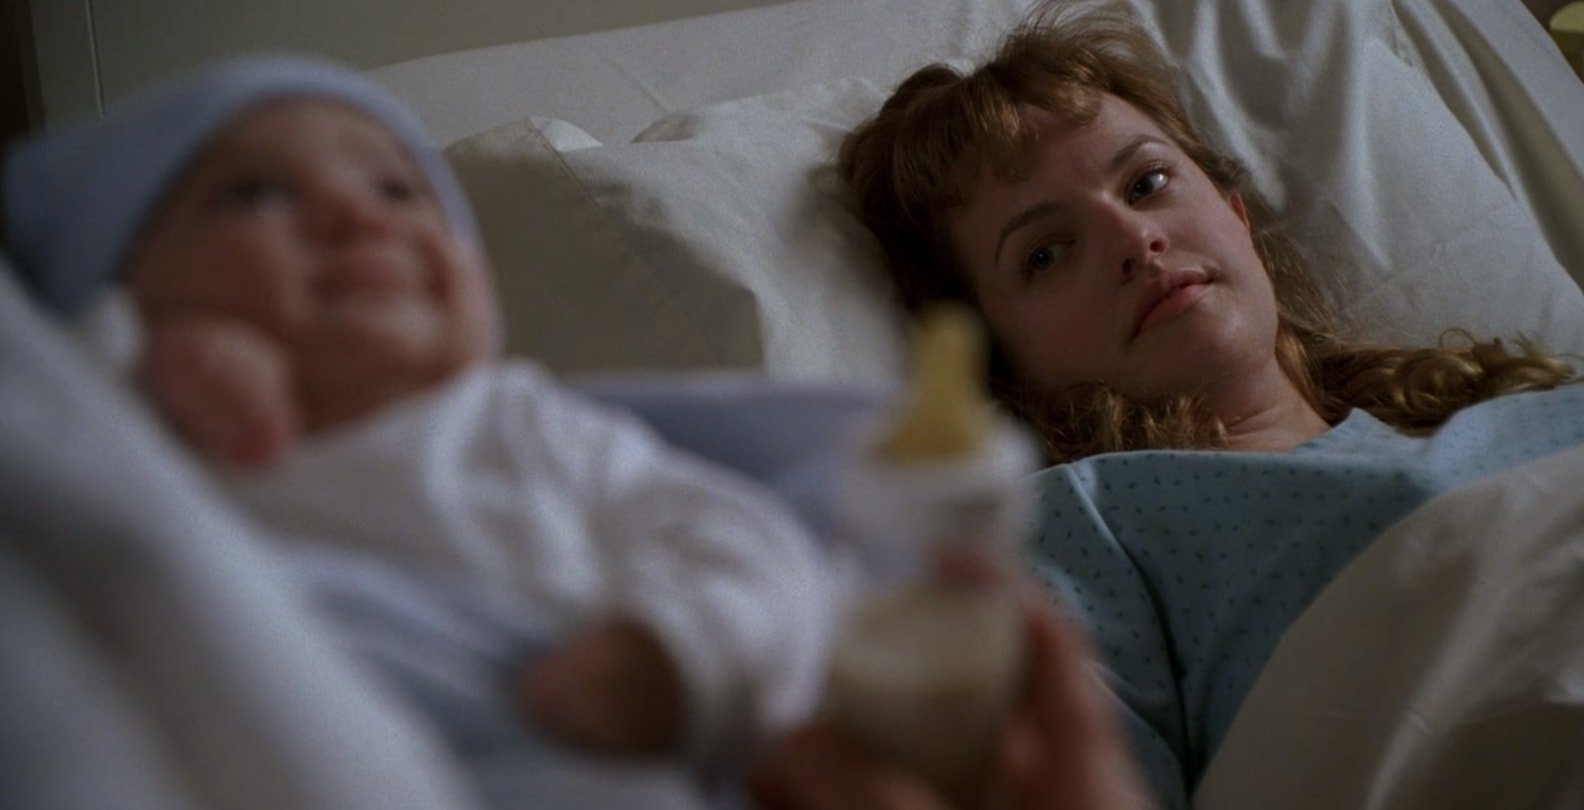 Peggy Olson gives birth to a child fathered by Pete Campbell in The Wheel (Mad Men: Season 1, Episode 13)